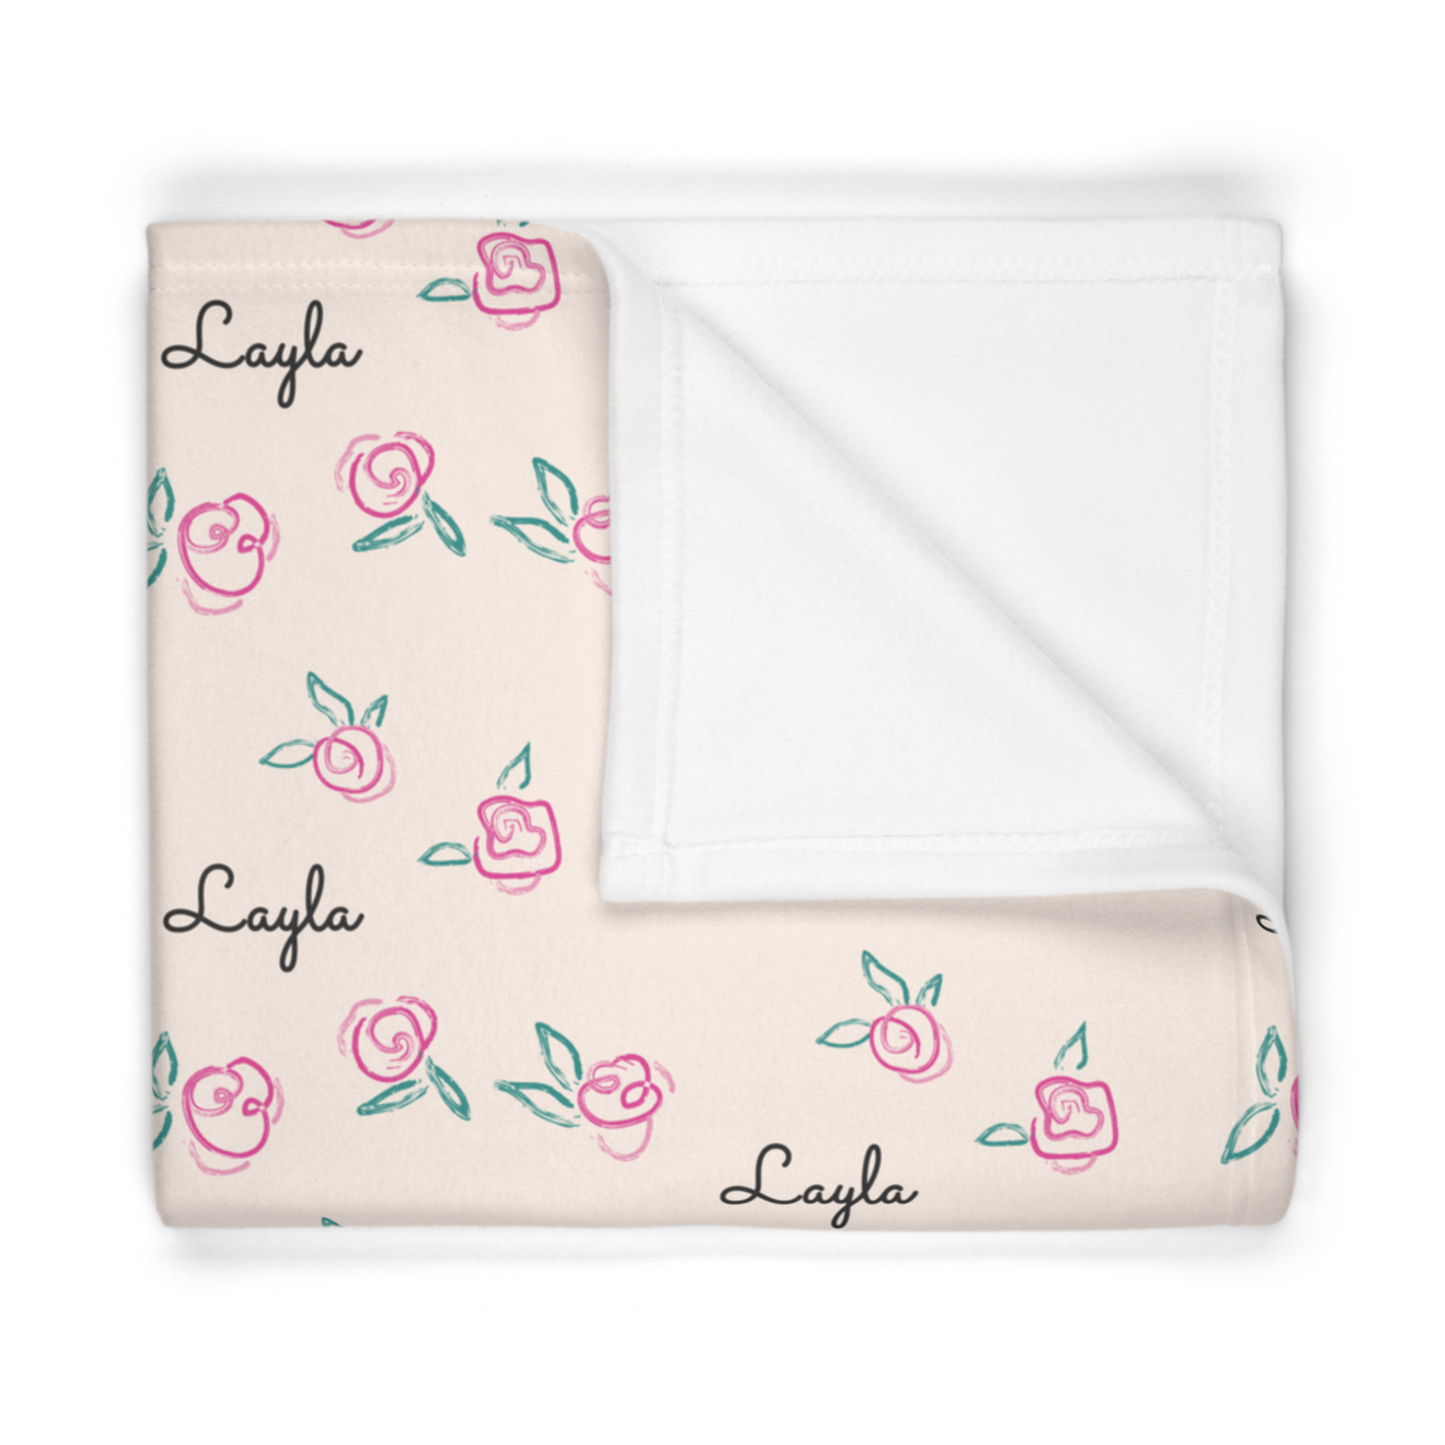 Folded fleece fabric personalized baby blanket in pink rose with green leaves pattern